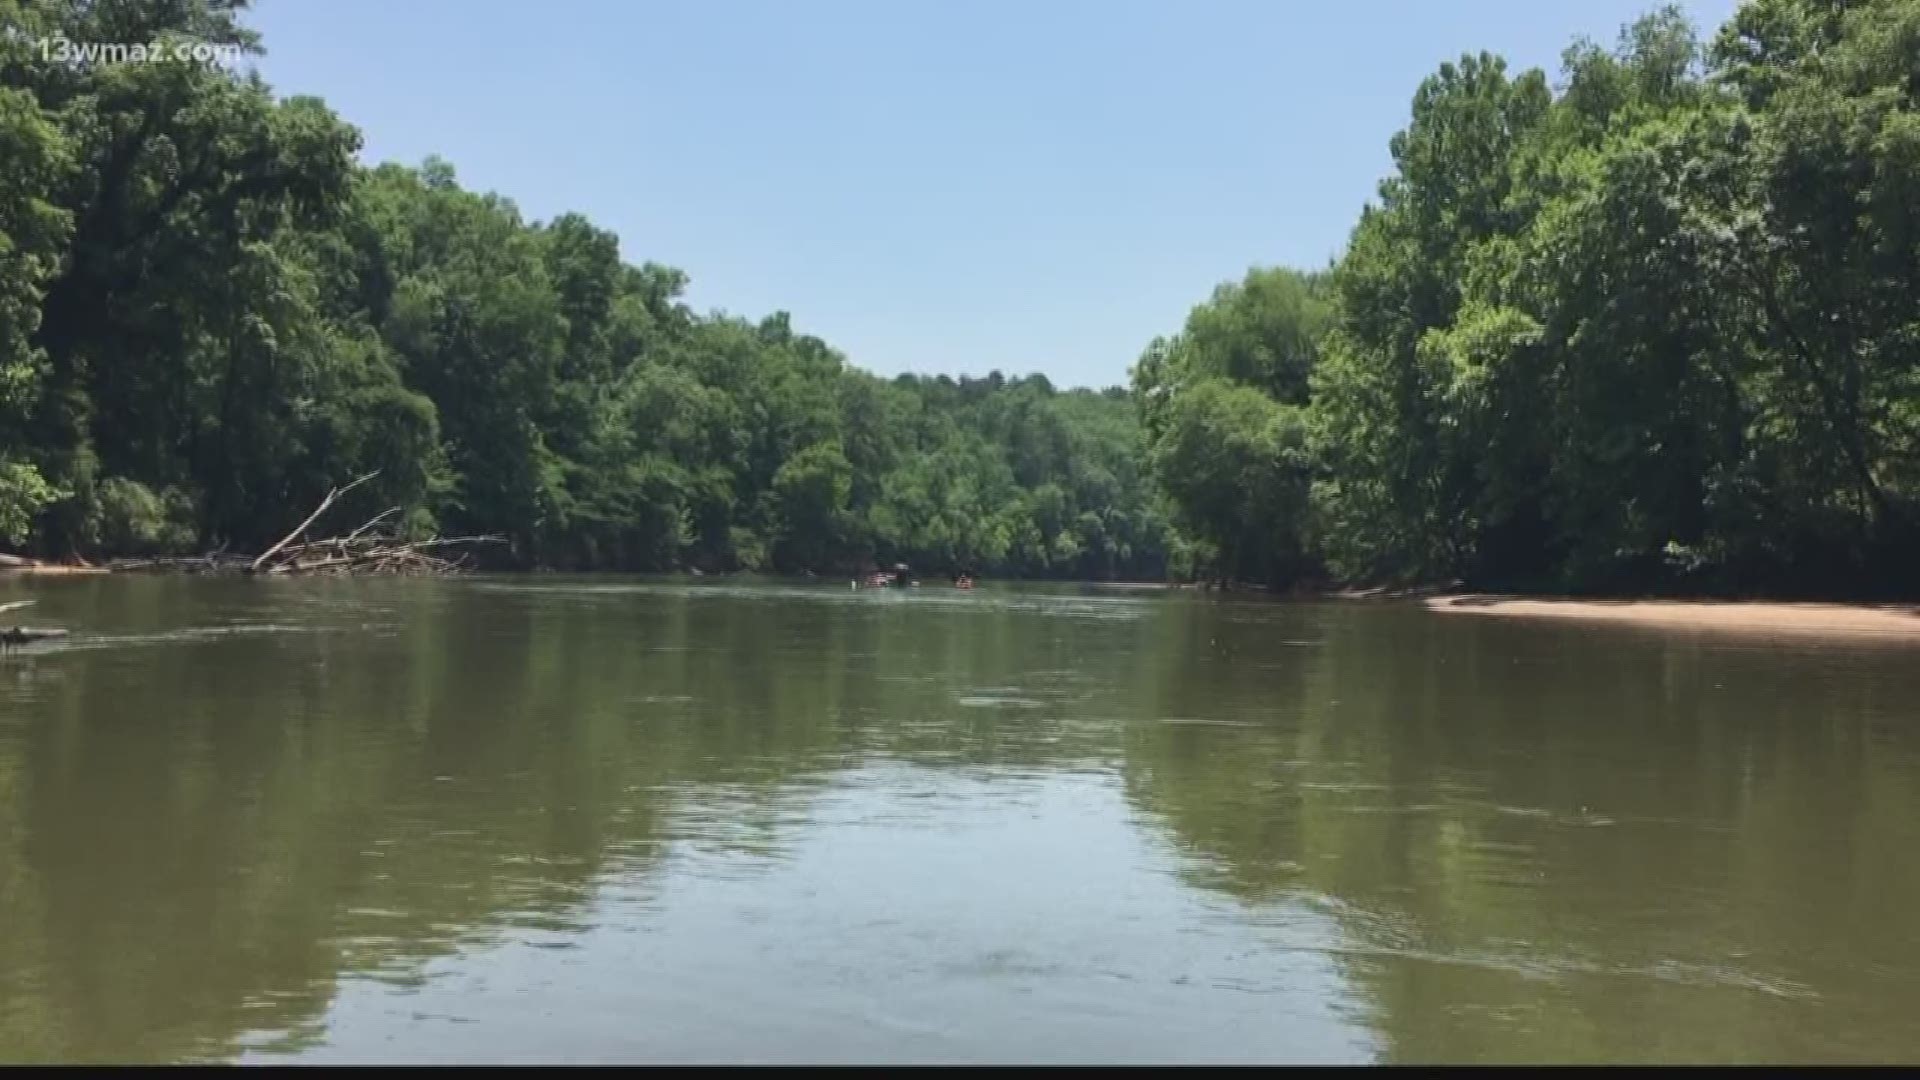 As the weather heats up, people are headed out to the Ocmulgee River for some fun in the sun. Here are the best ways to stay safe while out on the water.